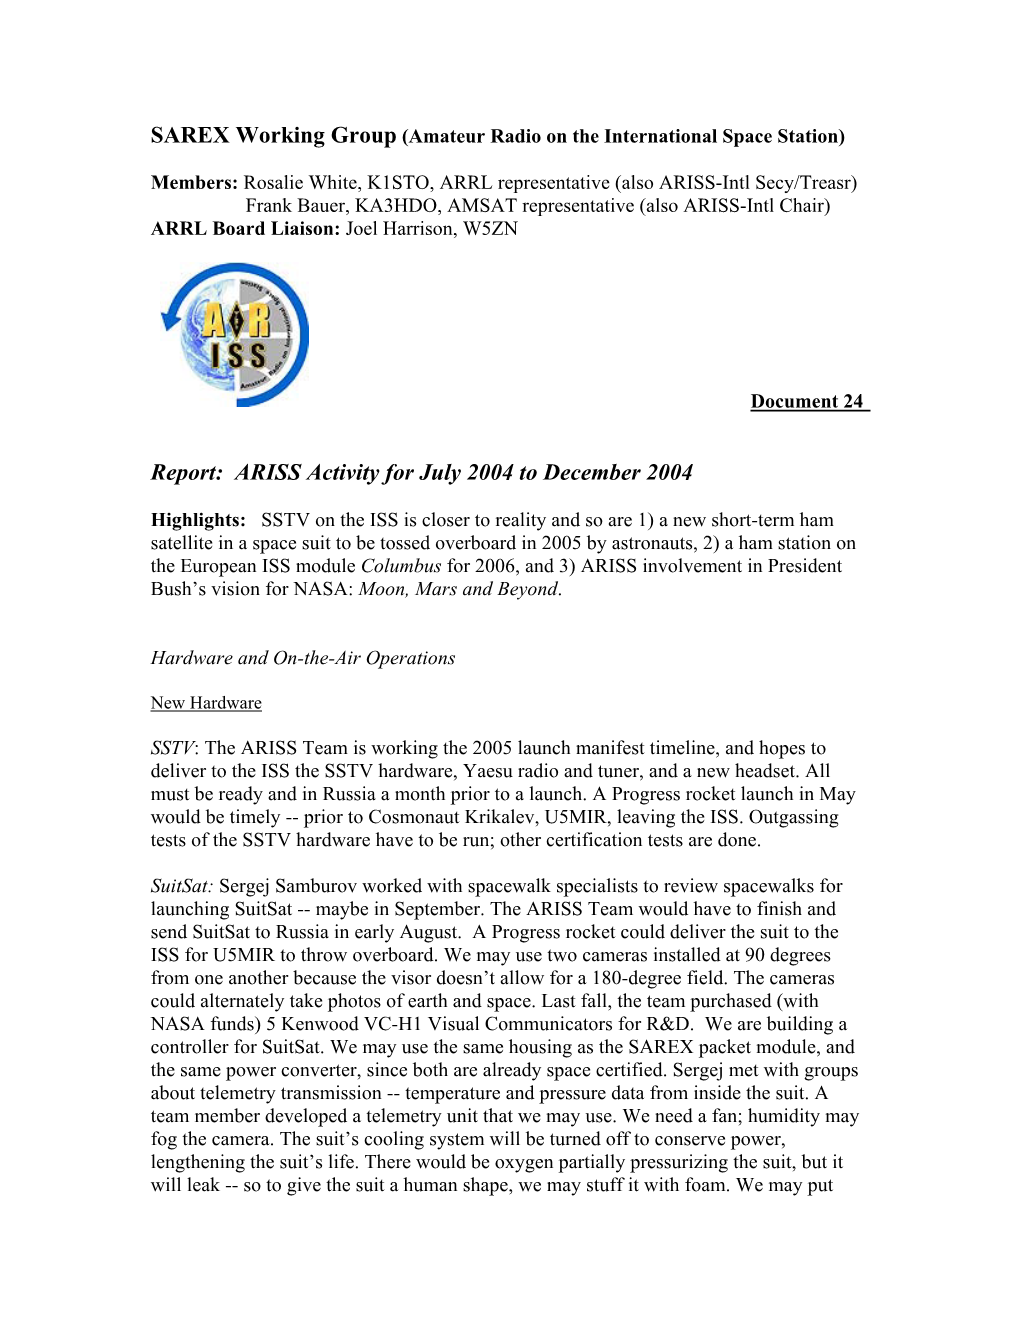 Report: ARISS Activity for July 2004 to December 2004